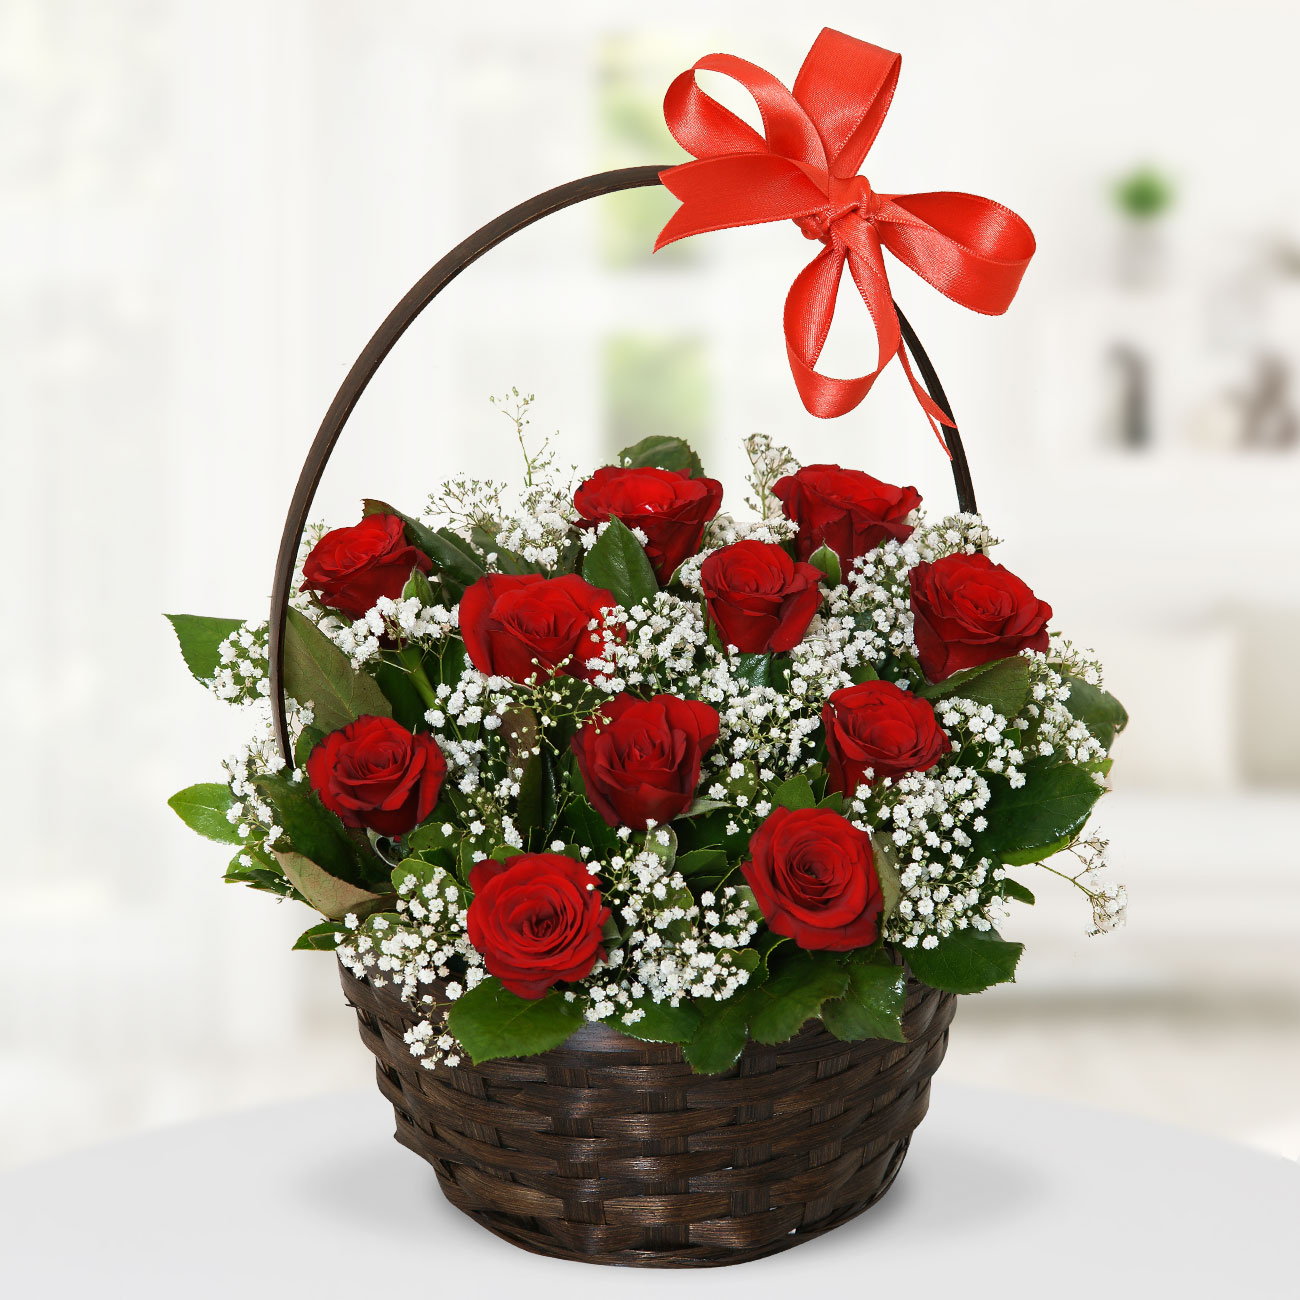 Send Flowers Turkey Flower Basket With Red Roses From 118usd